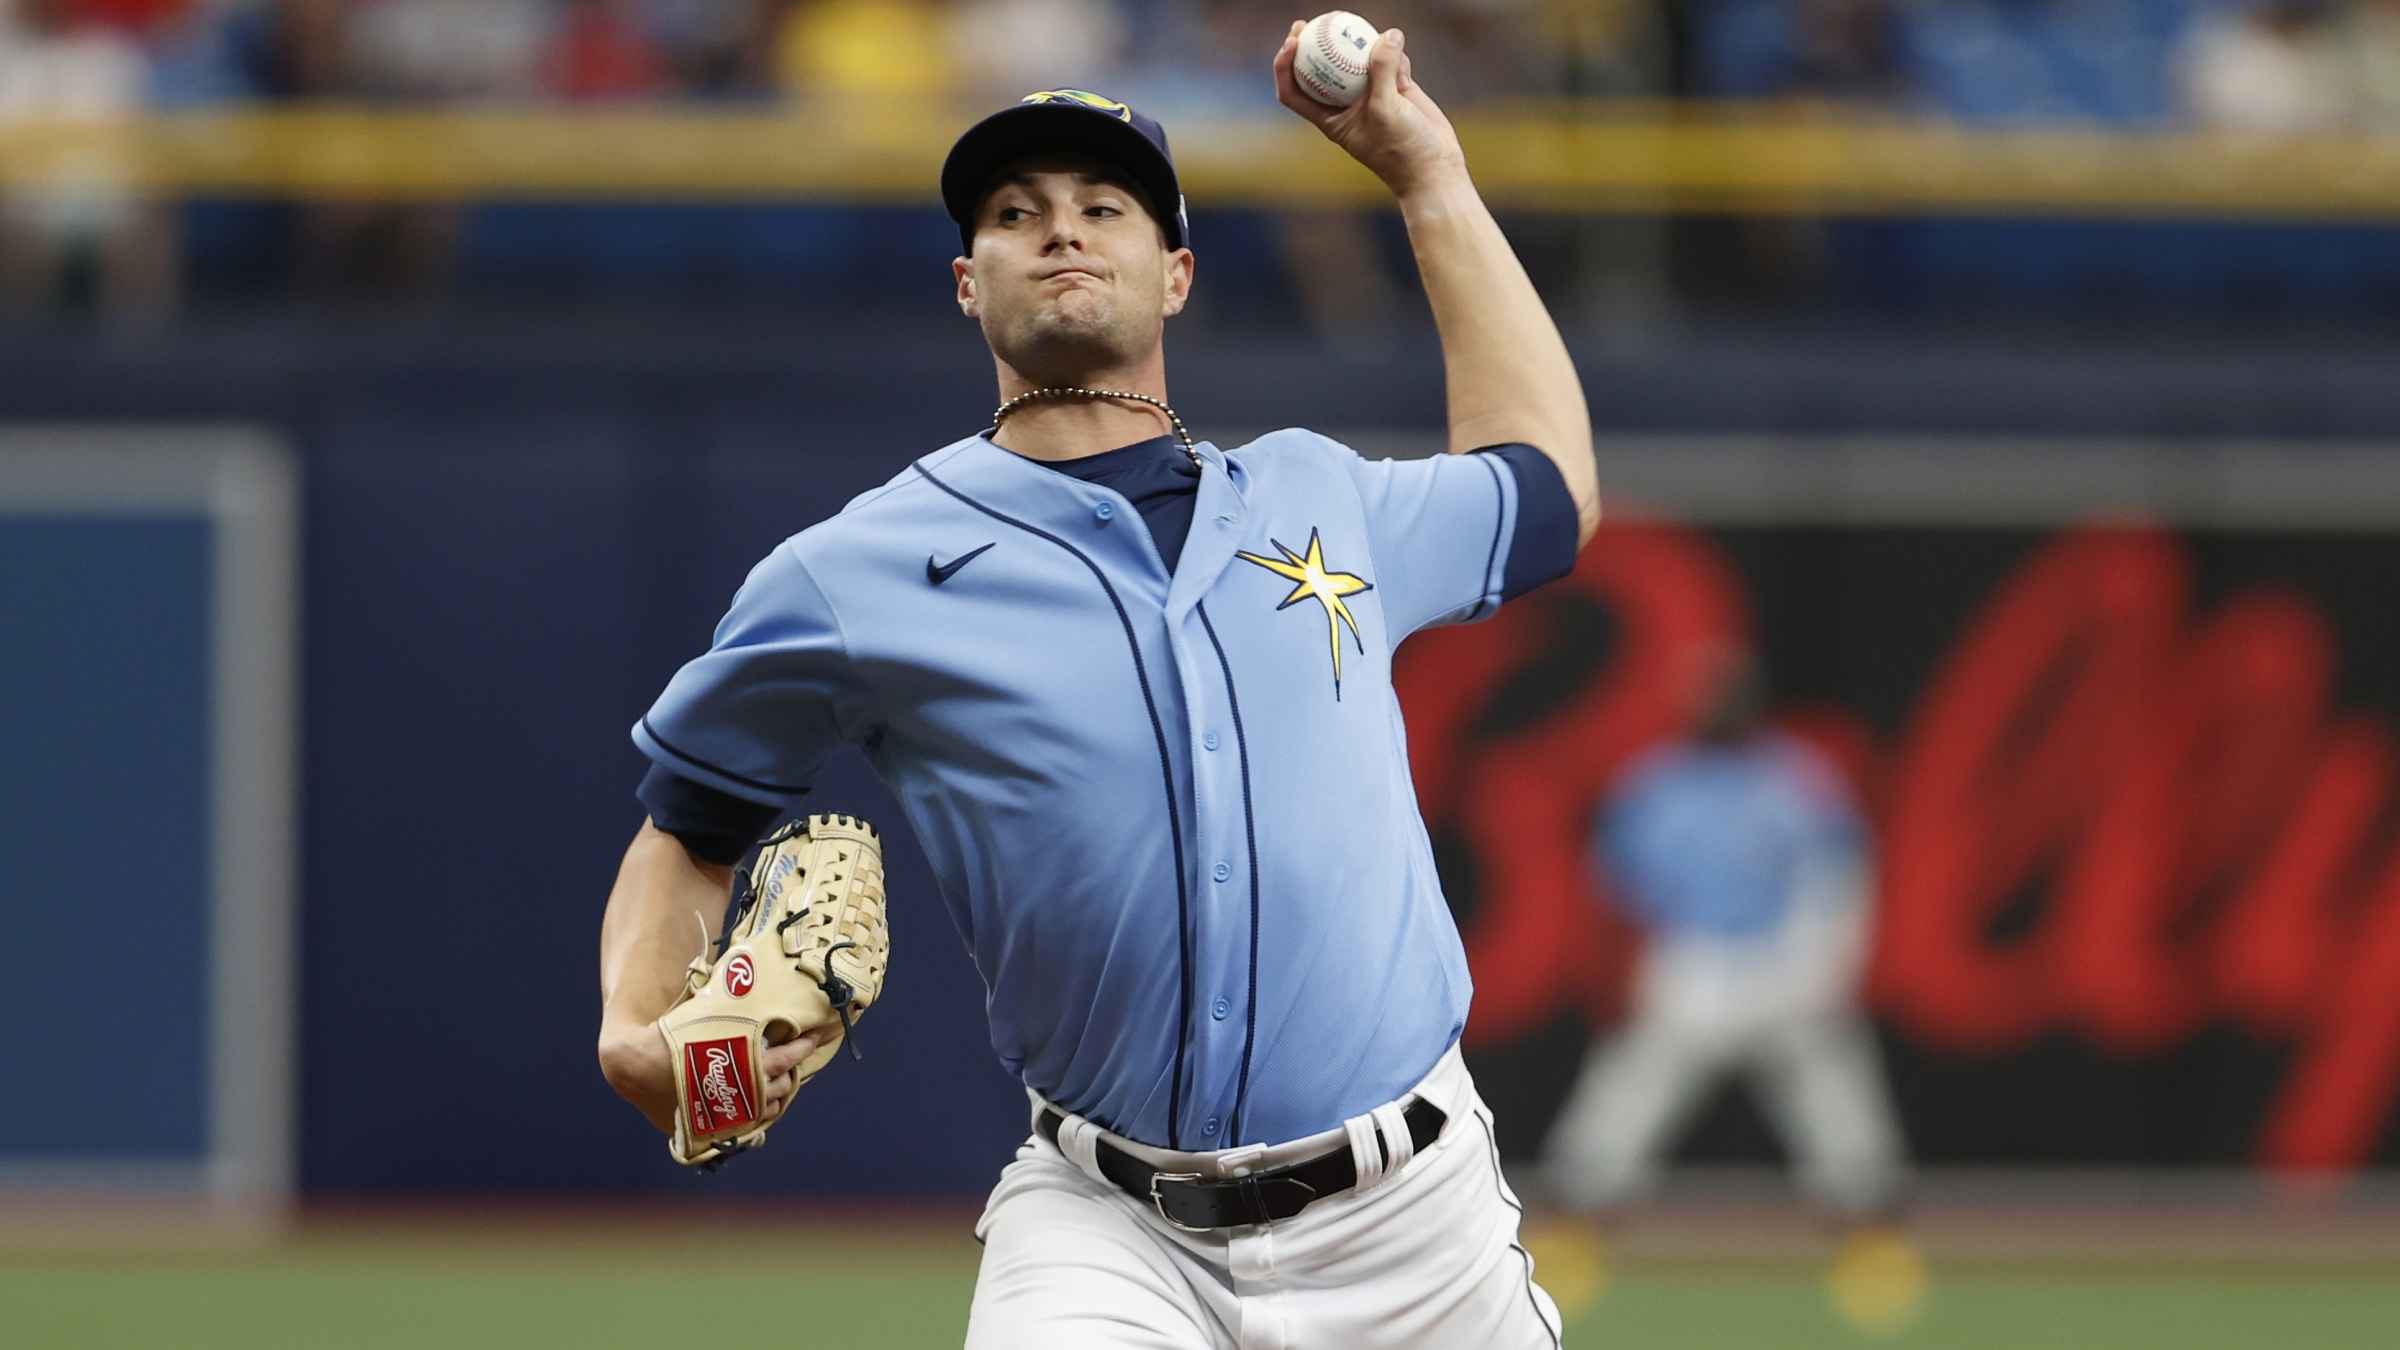 GameDay Preview: Shane McClanahan Back on Mound as Tampa Bay Rays